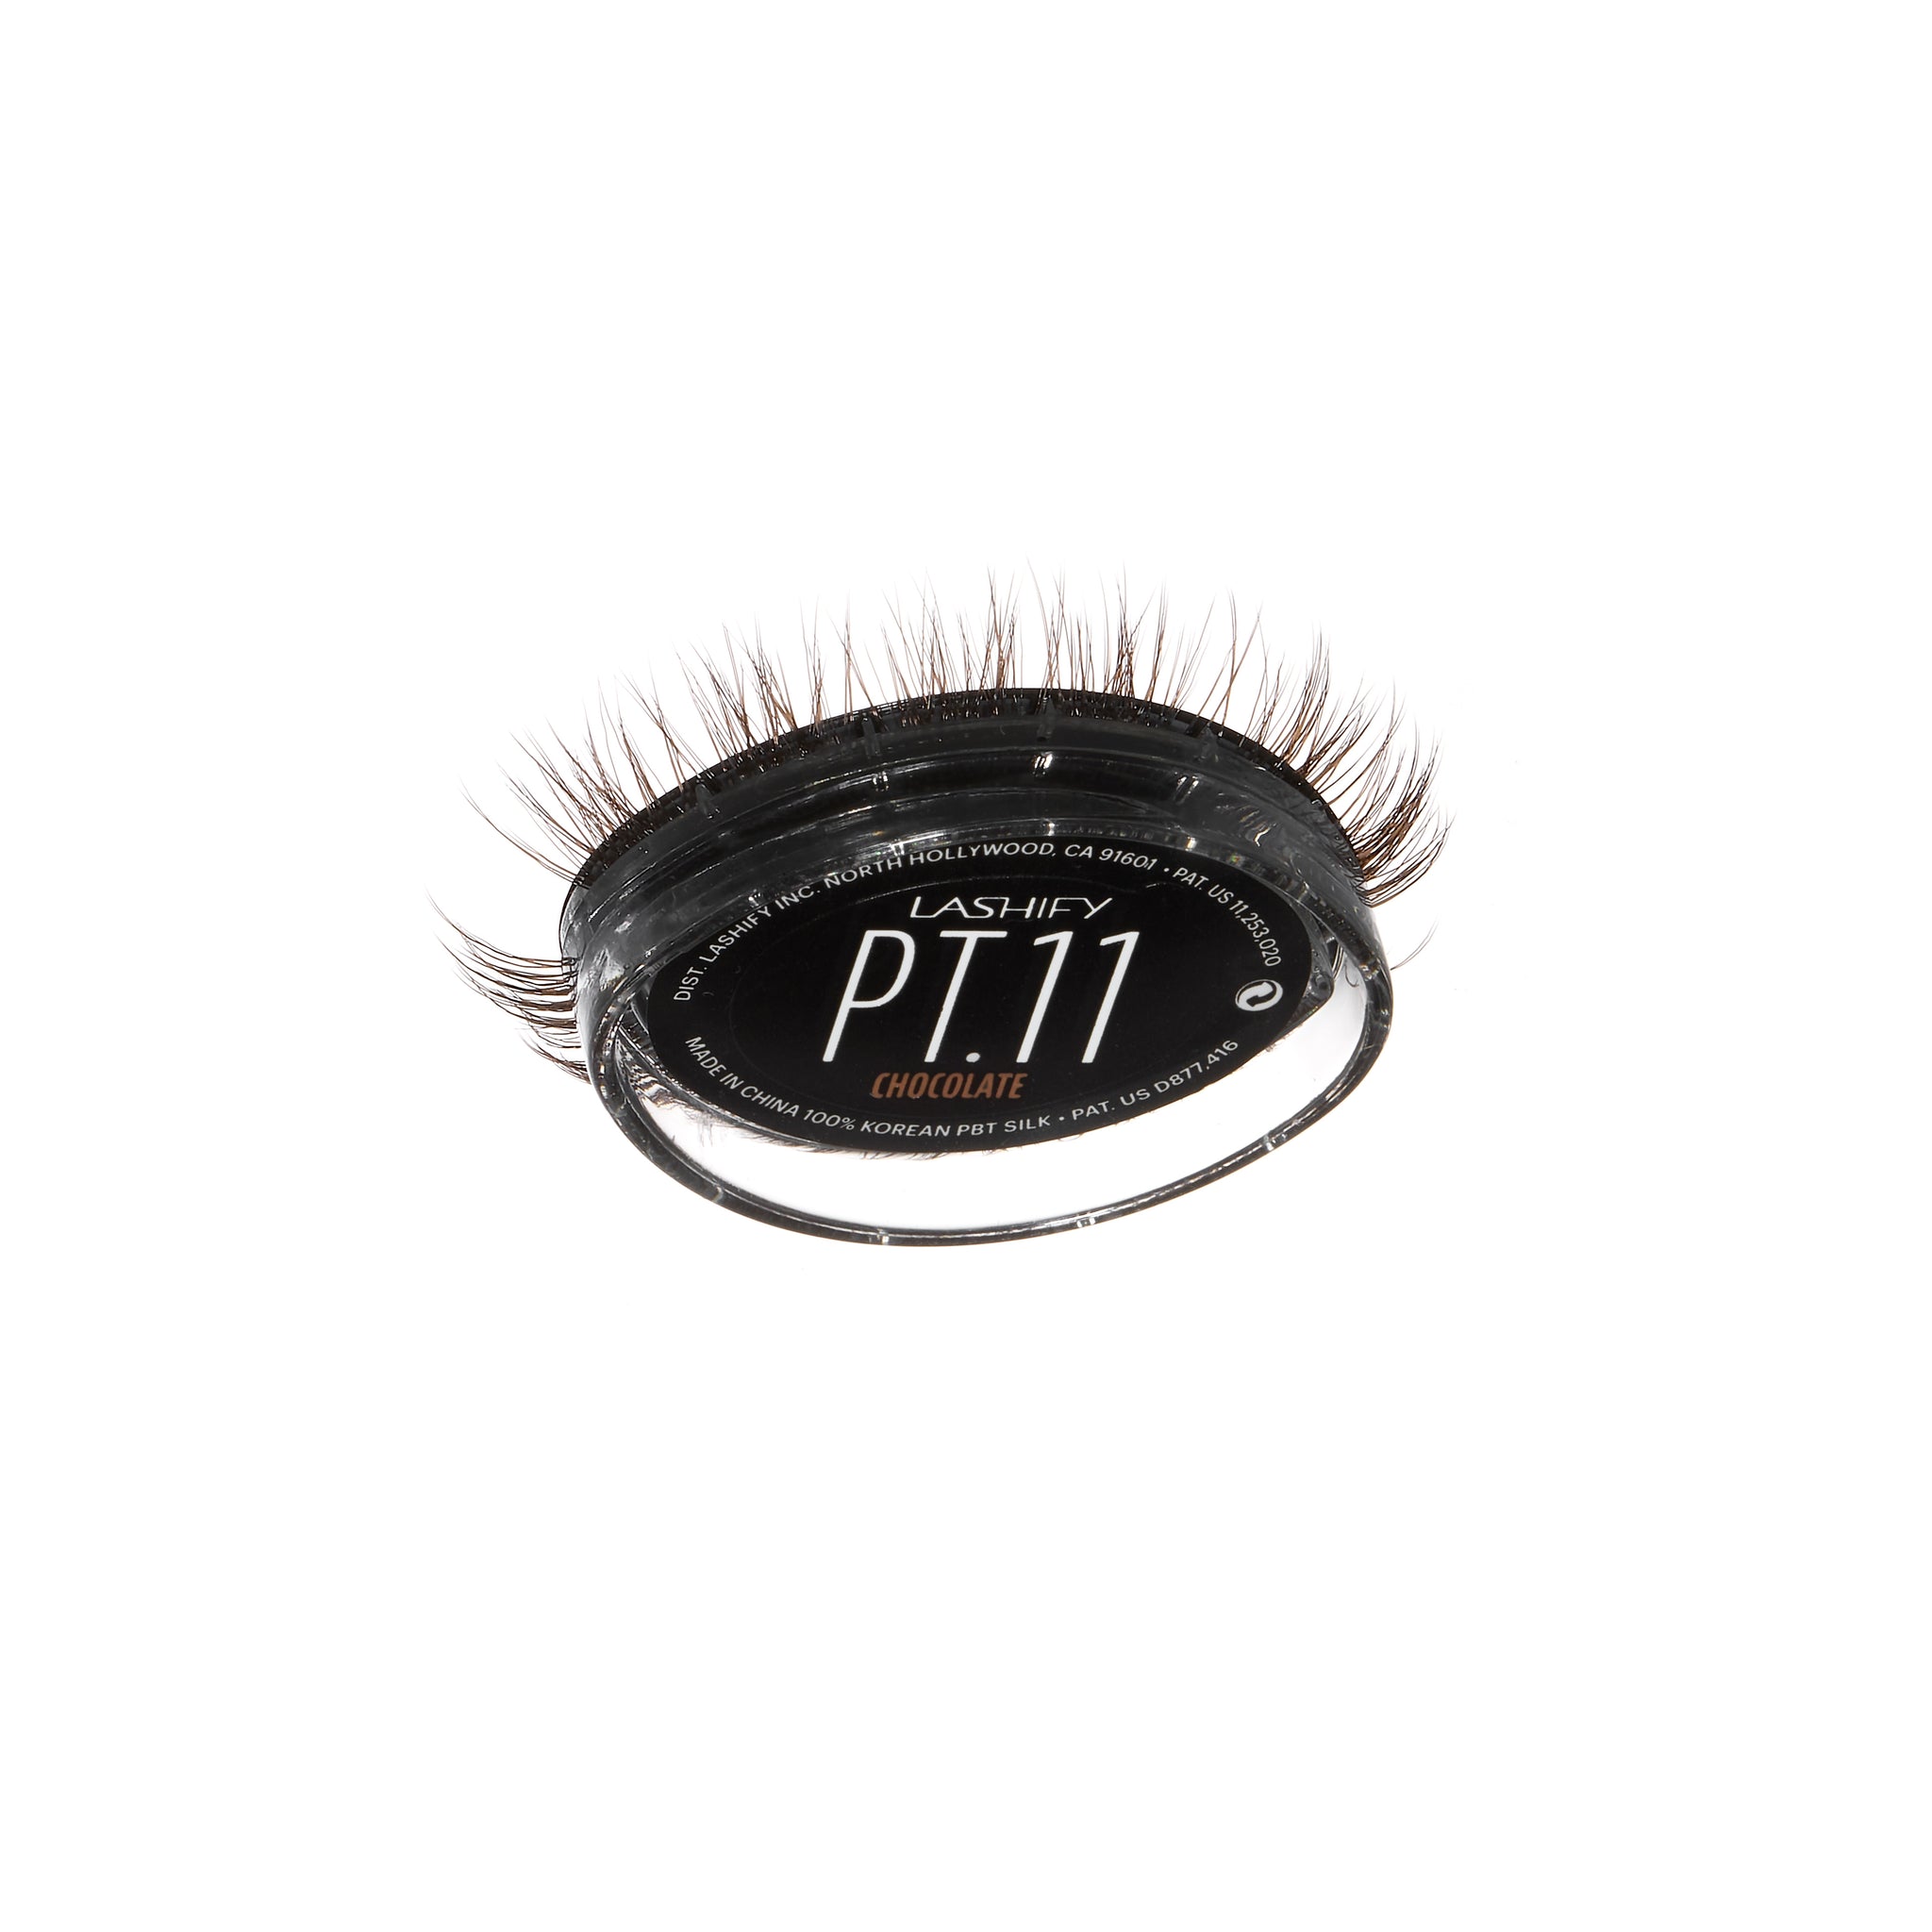 Plushy Tame Chocolate Gossamer® Lashes - Pro pack (2 count)